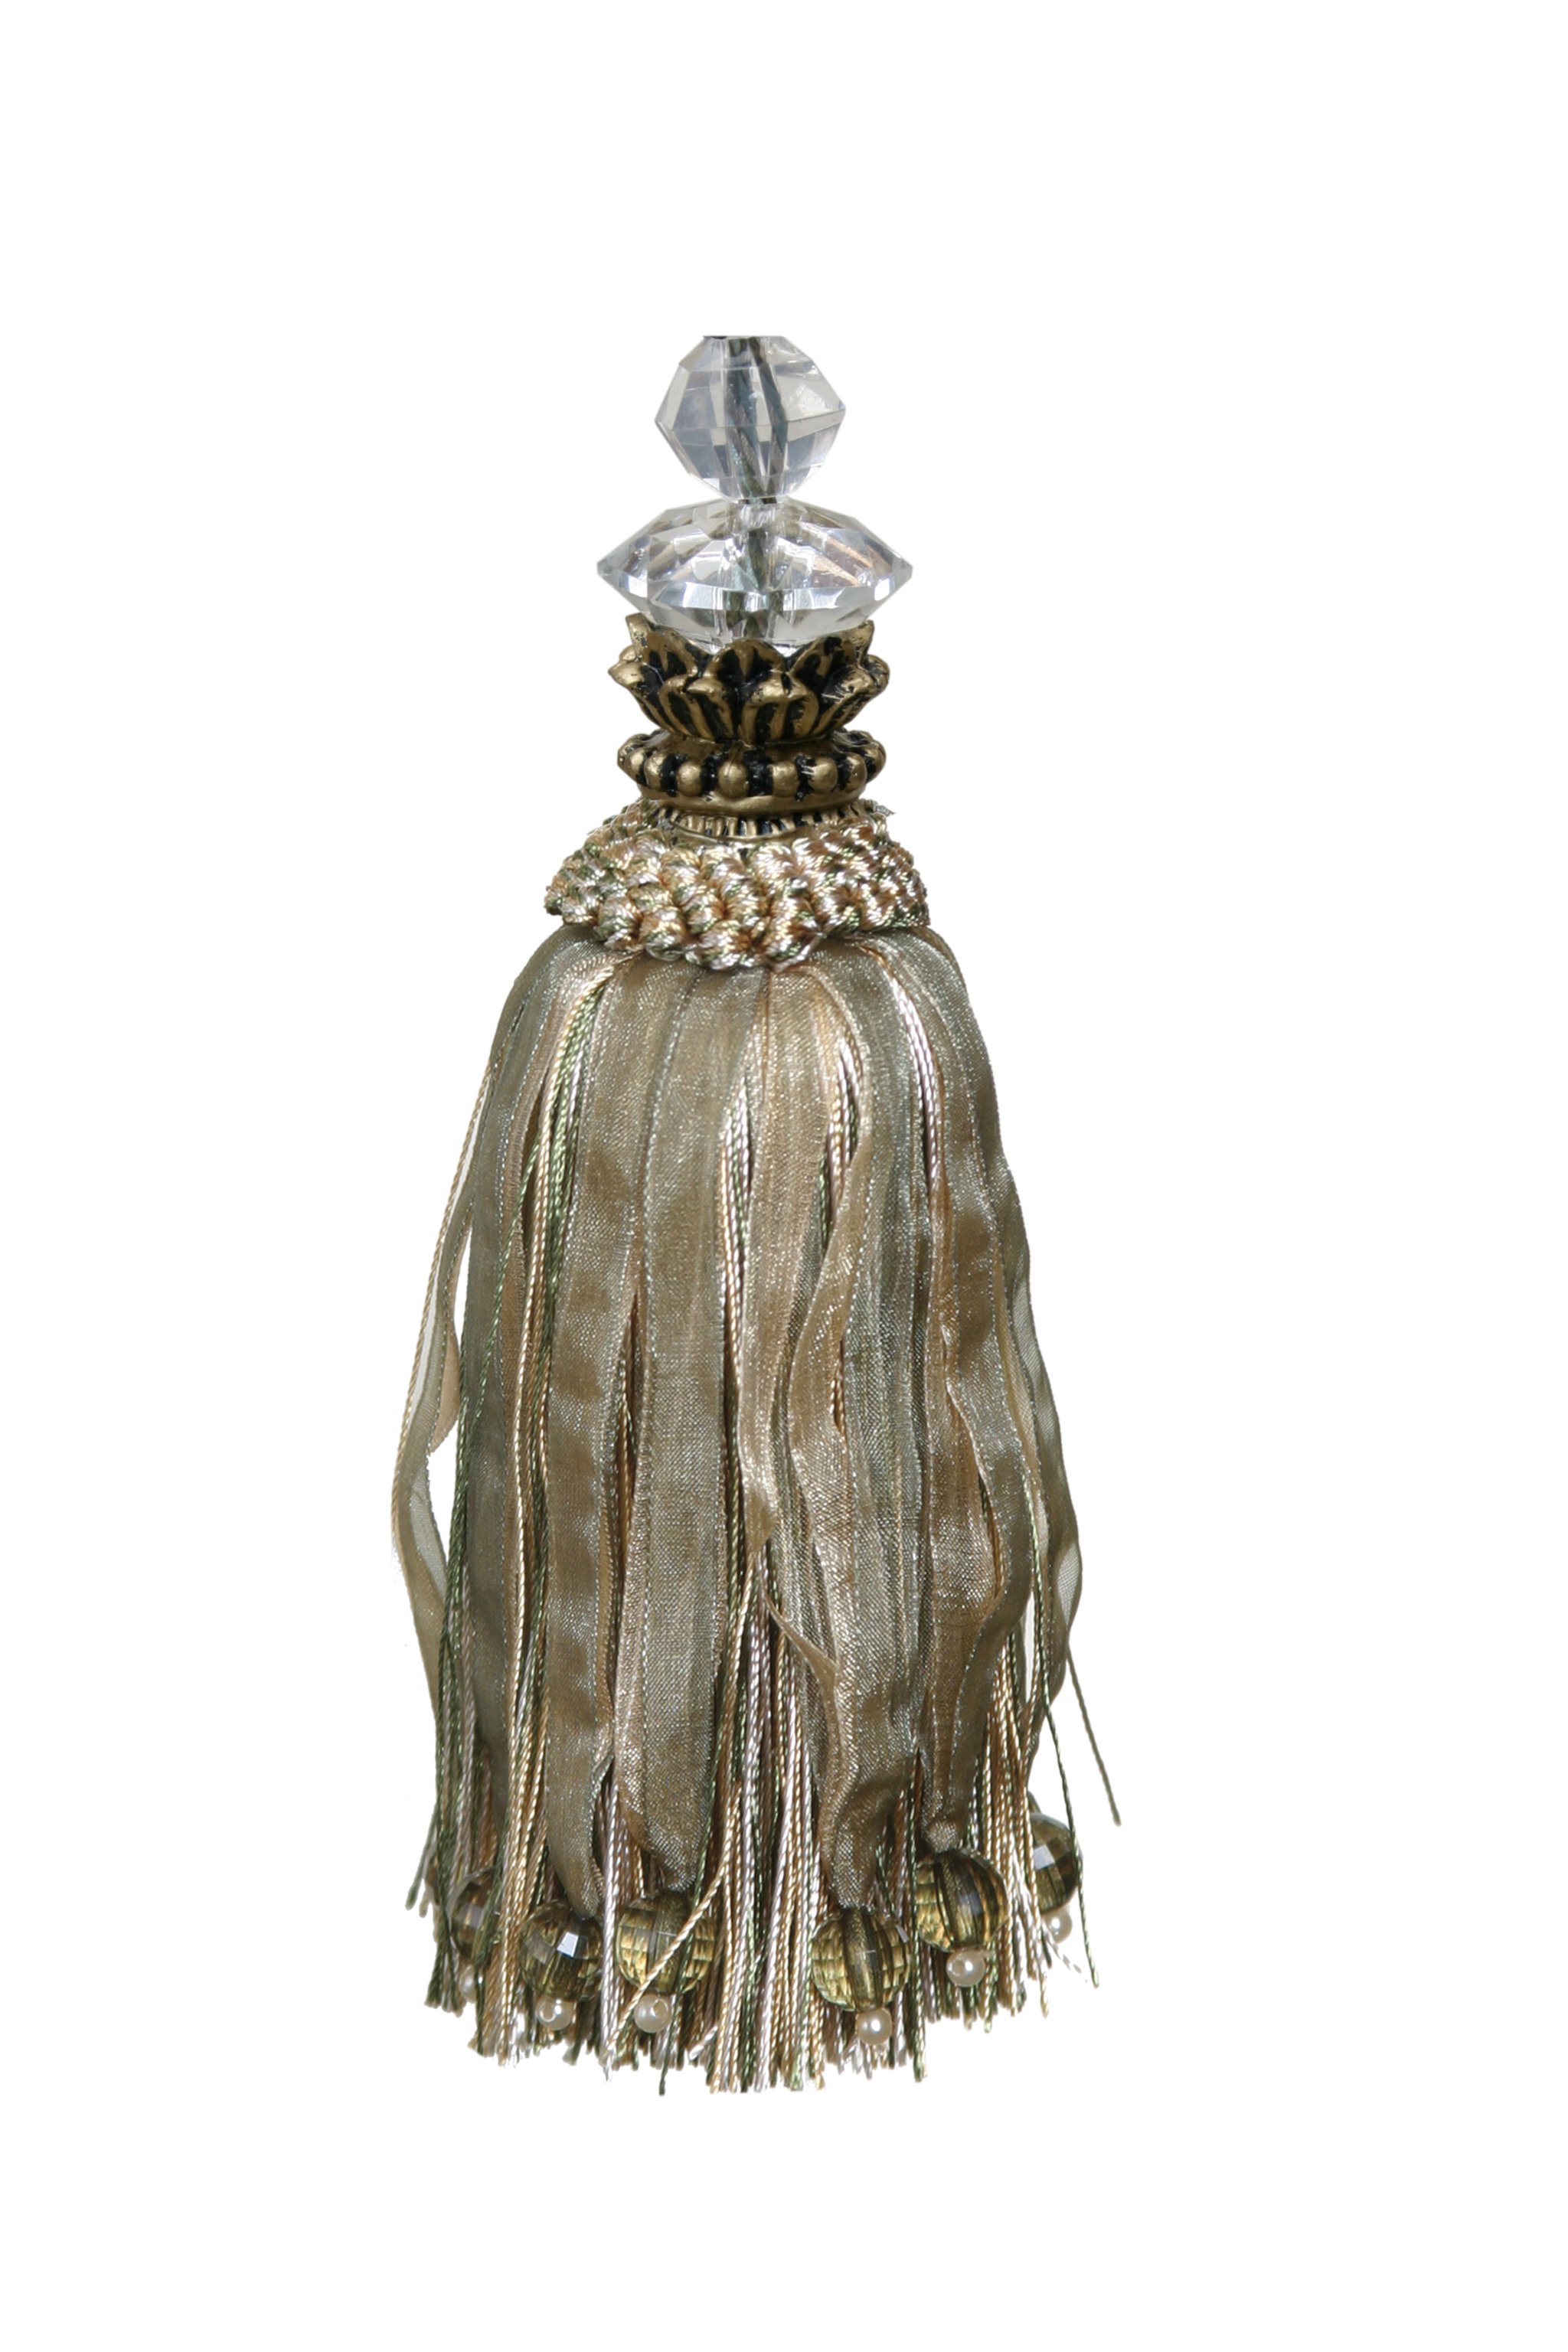 Tassel with Glass Bead in Tulip Top - Light Green / Gold 18cm